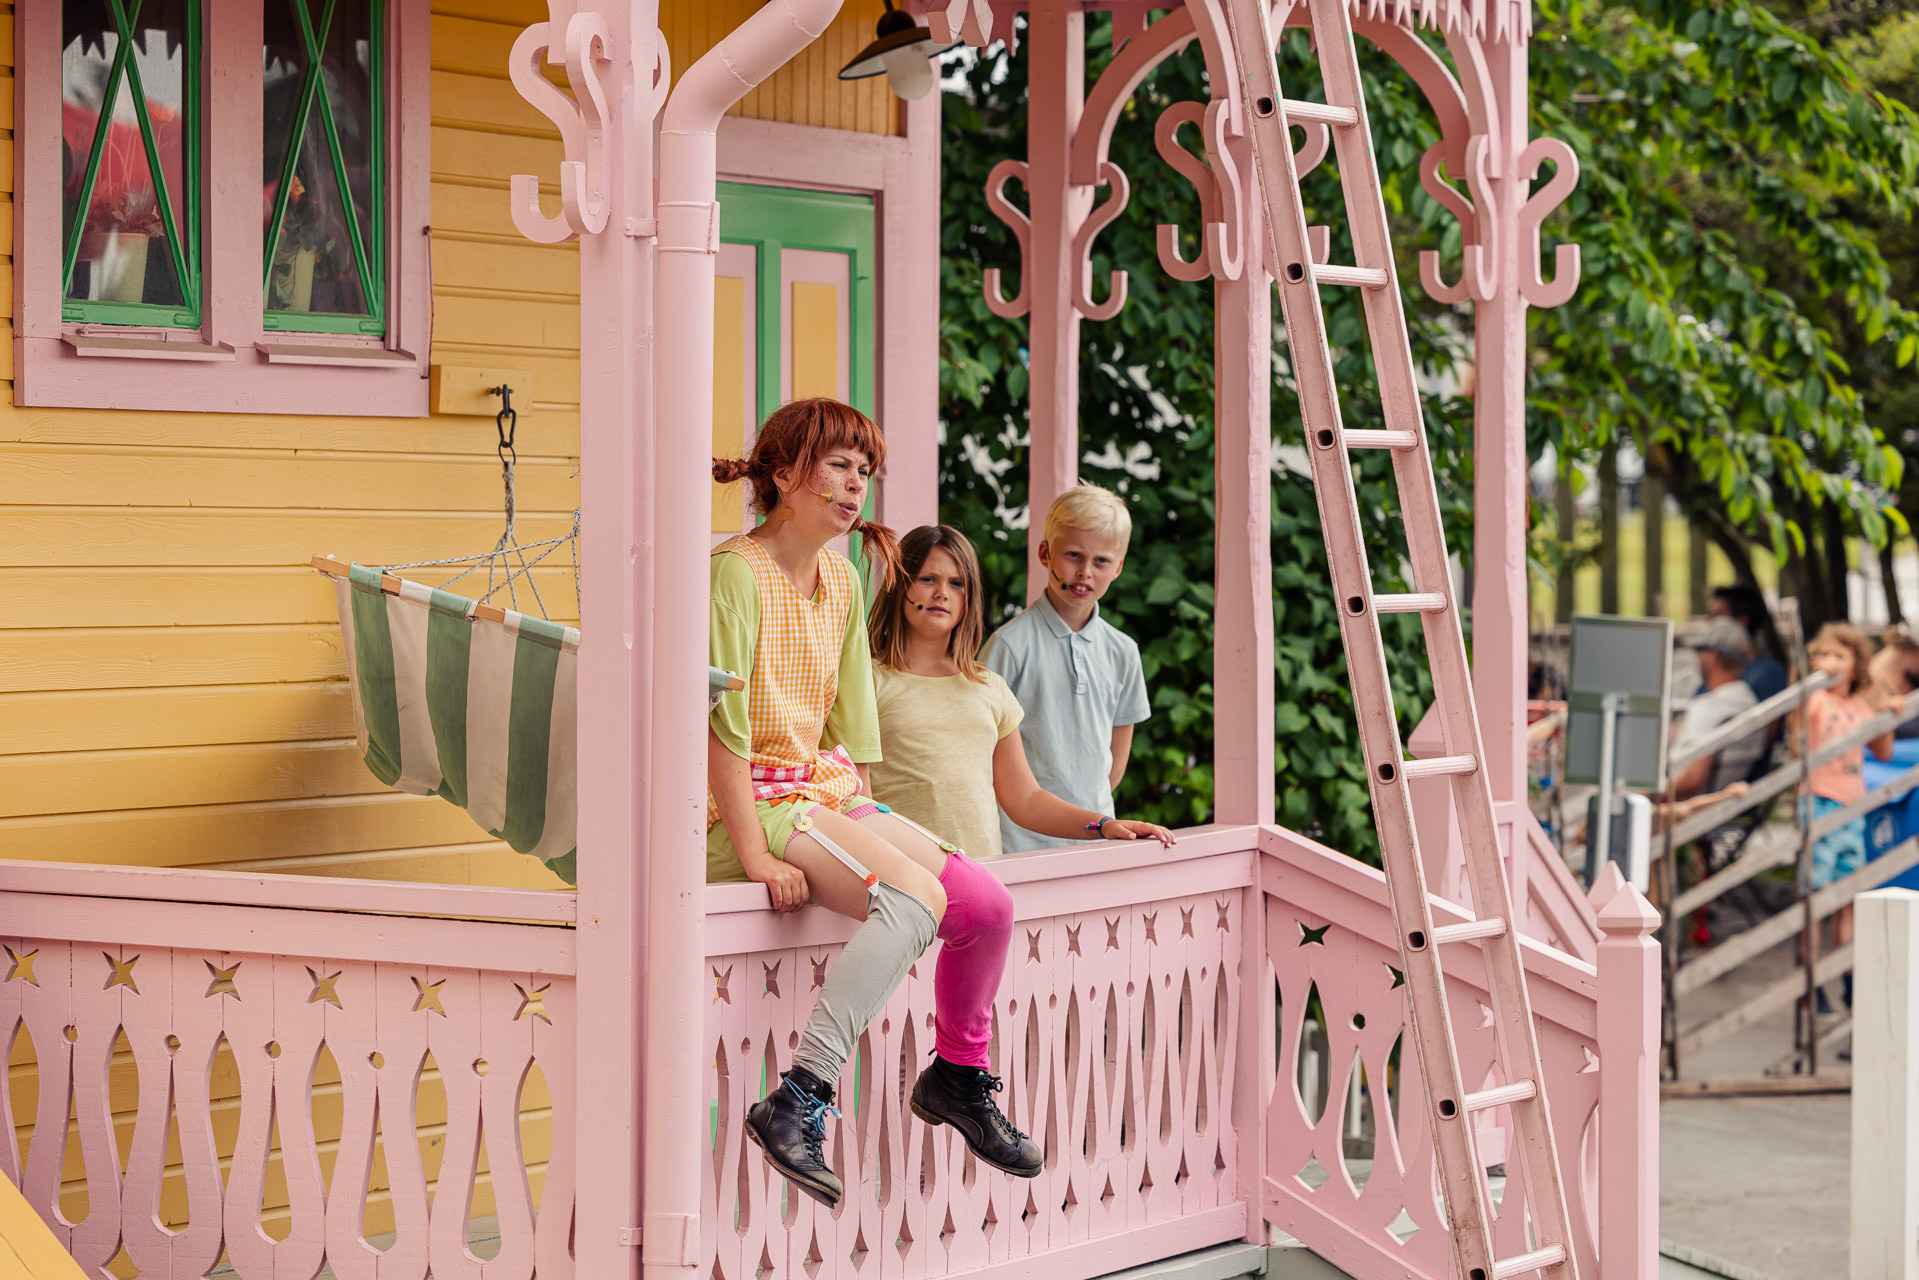 A theatre performance with Pippi Longstocking who is sitting on the porch at her yellow house, Tommy and Annika are standing by her side